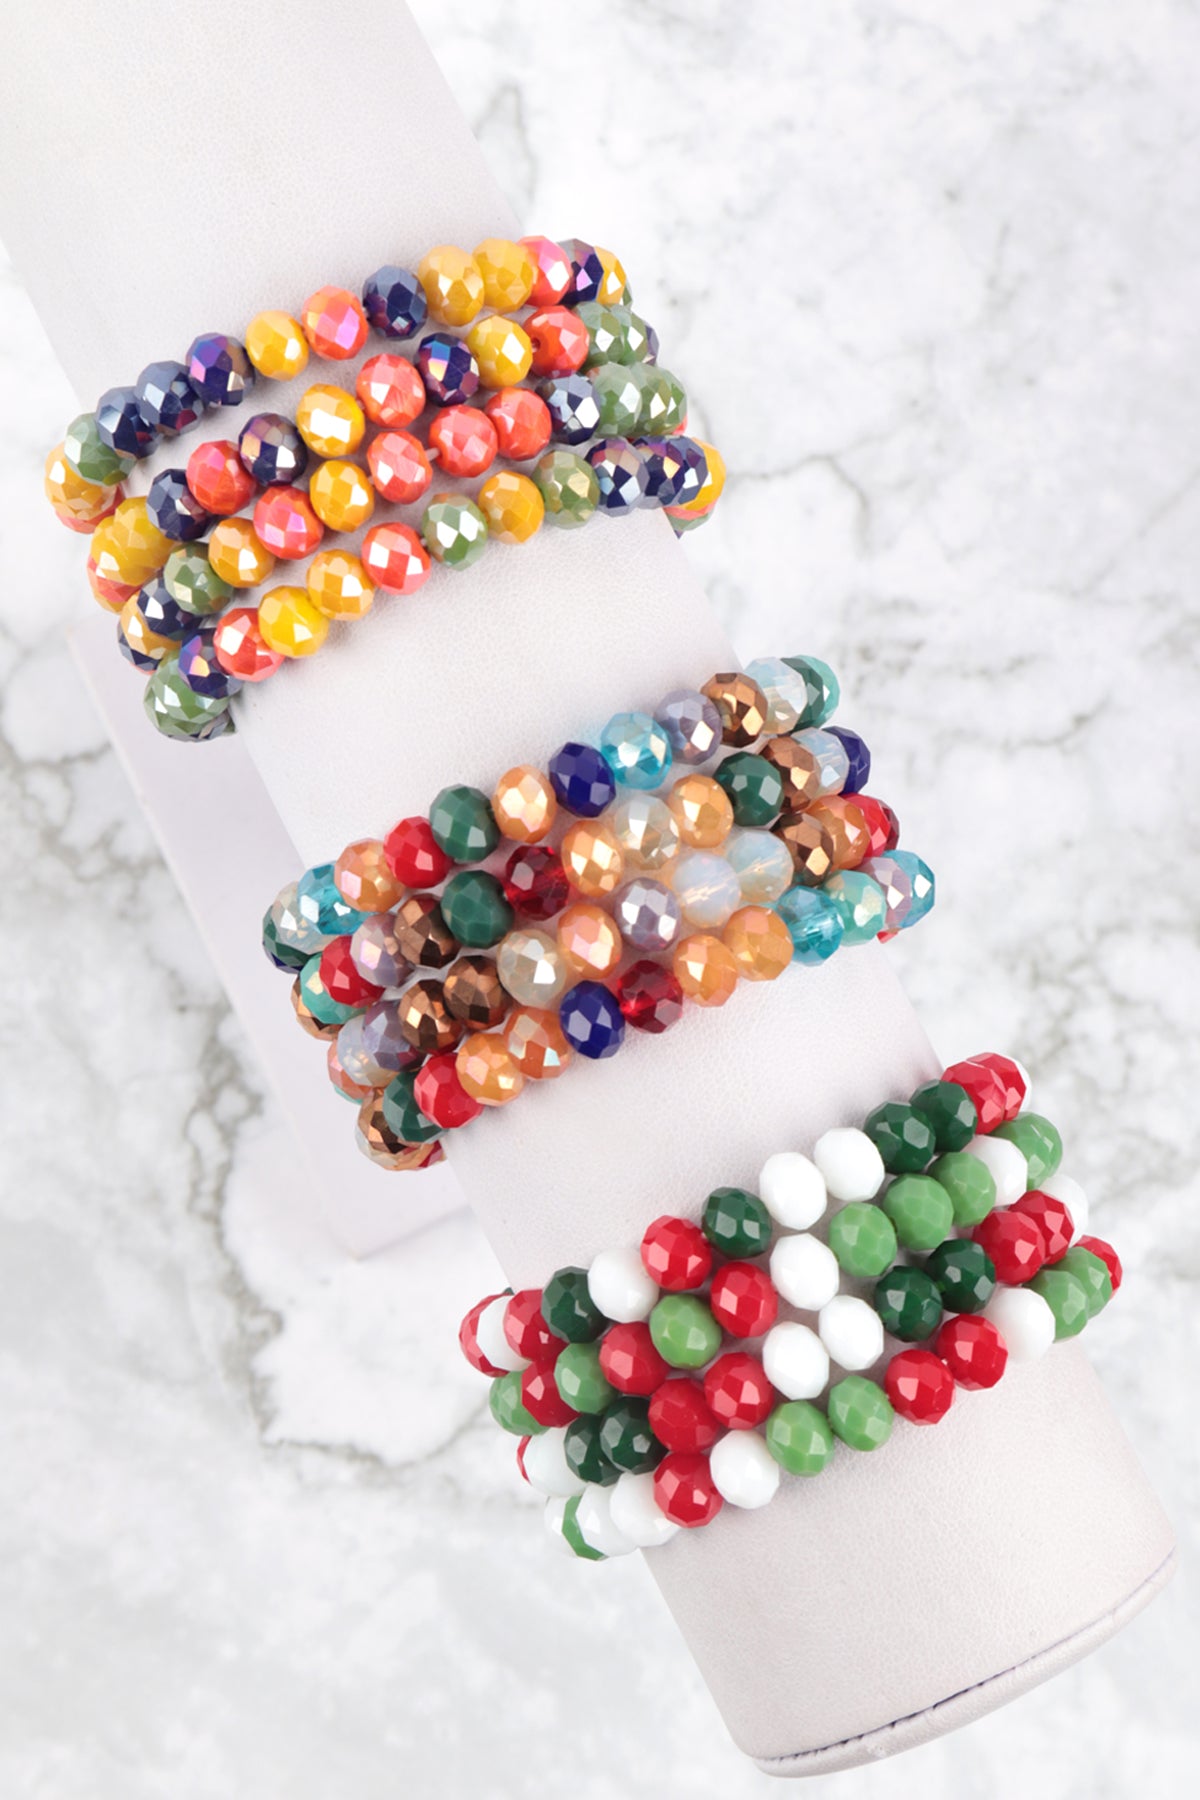 RONDELLE BEADS 4 LAYERED STACKABLE STRETCH BRACELET SET (NOW $ 2.00 ONLY!)